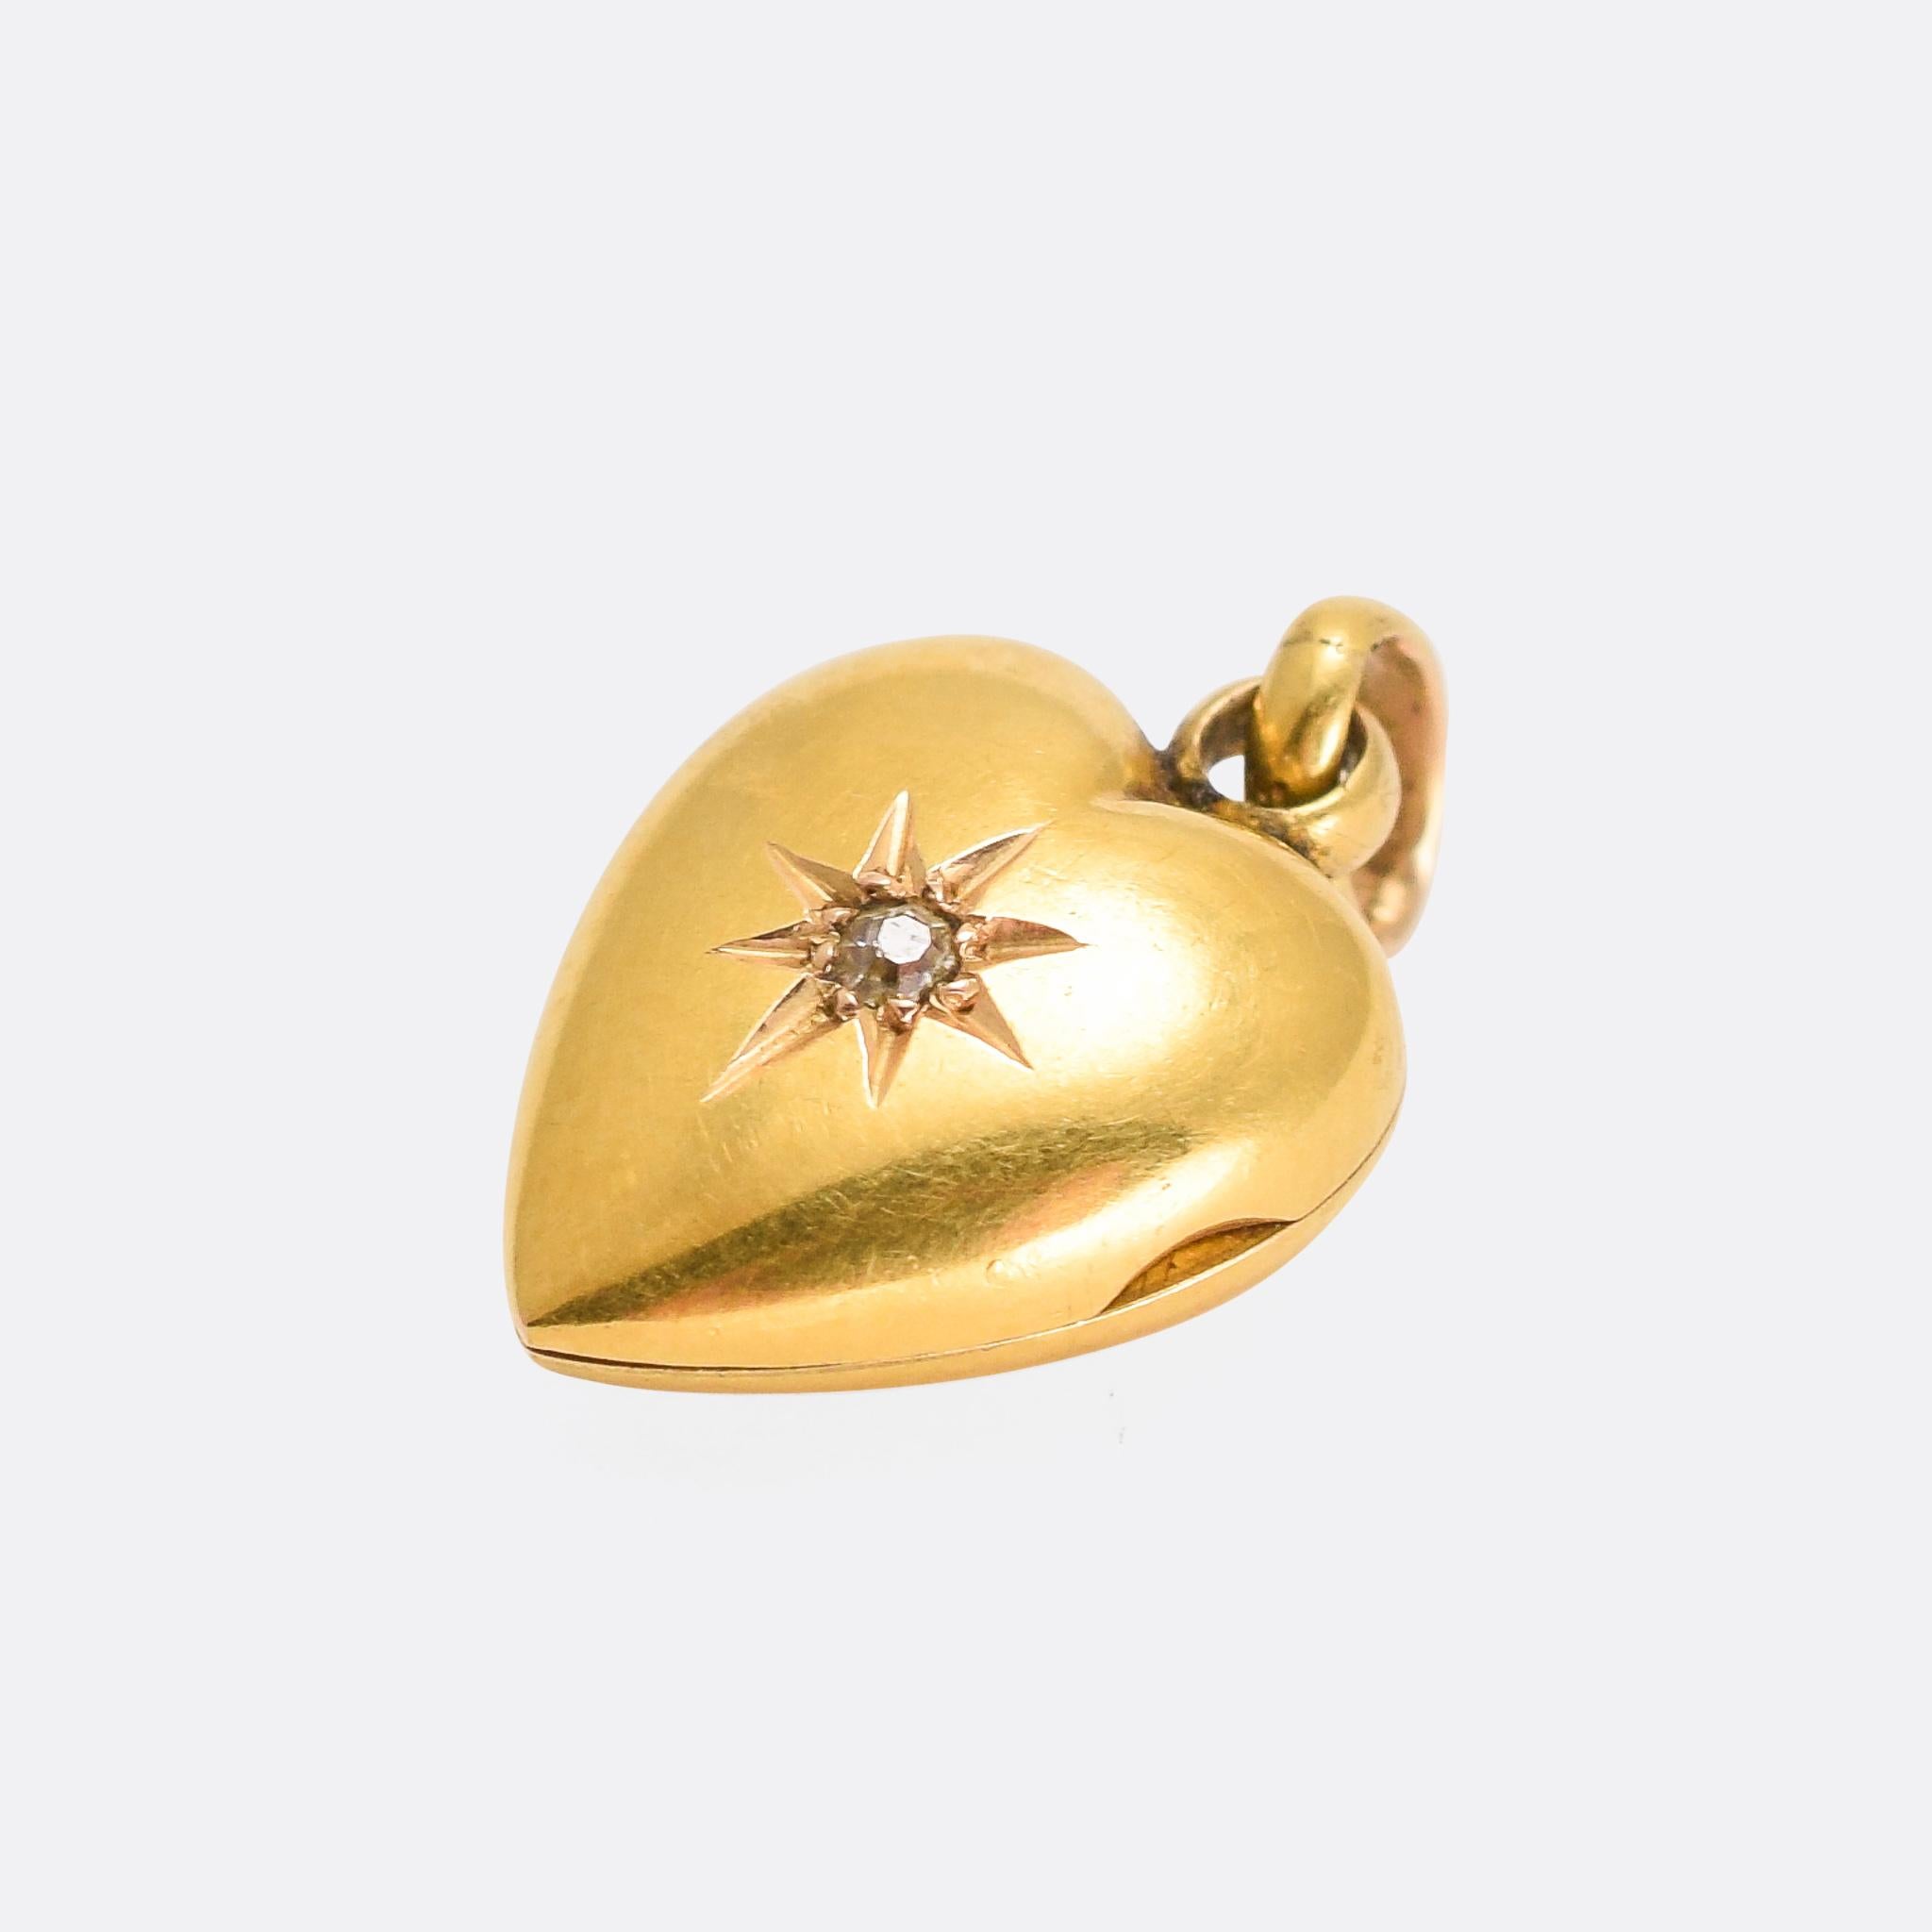 A cute antique puffed heart locket dating from the early 20th Century. It’s set in the centre with a an old cut diamond in a star setting. Modelled in 15 karat gold and complete with the original bail, the piece opens to reveal two locket